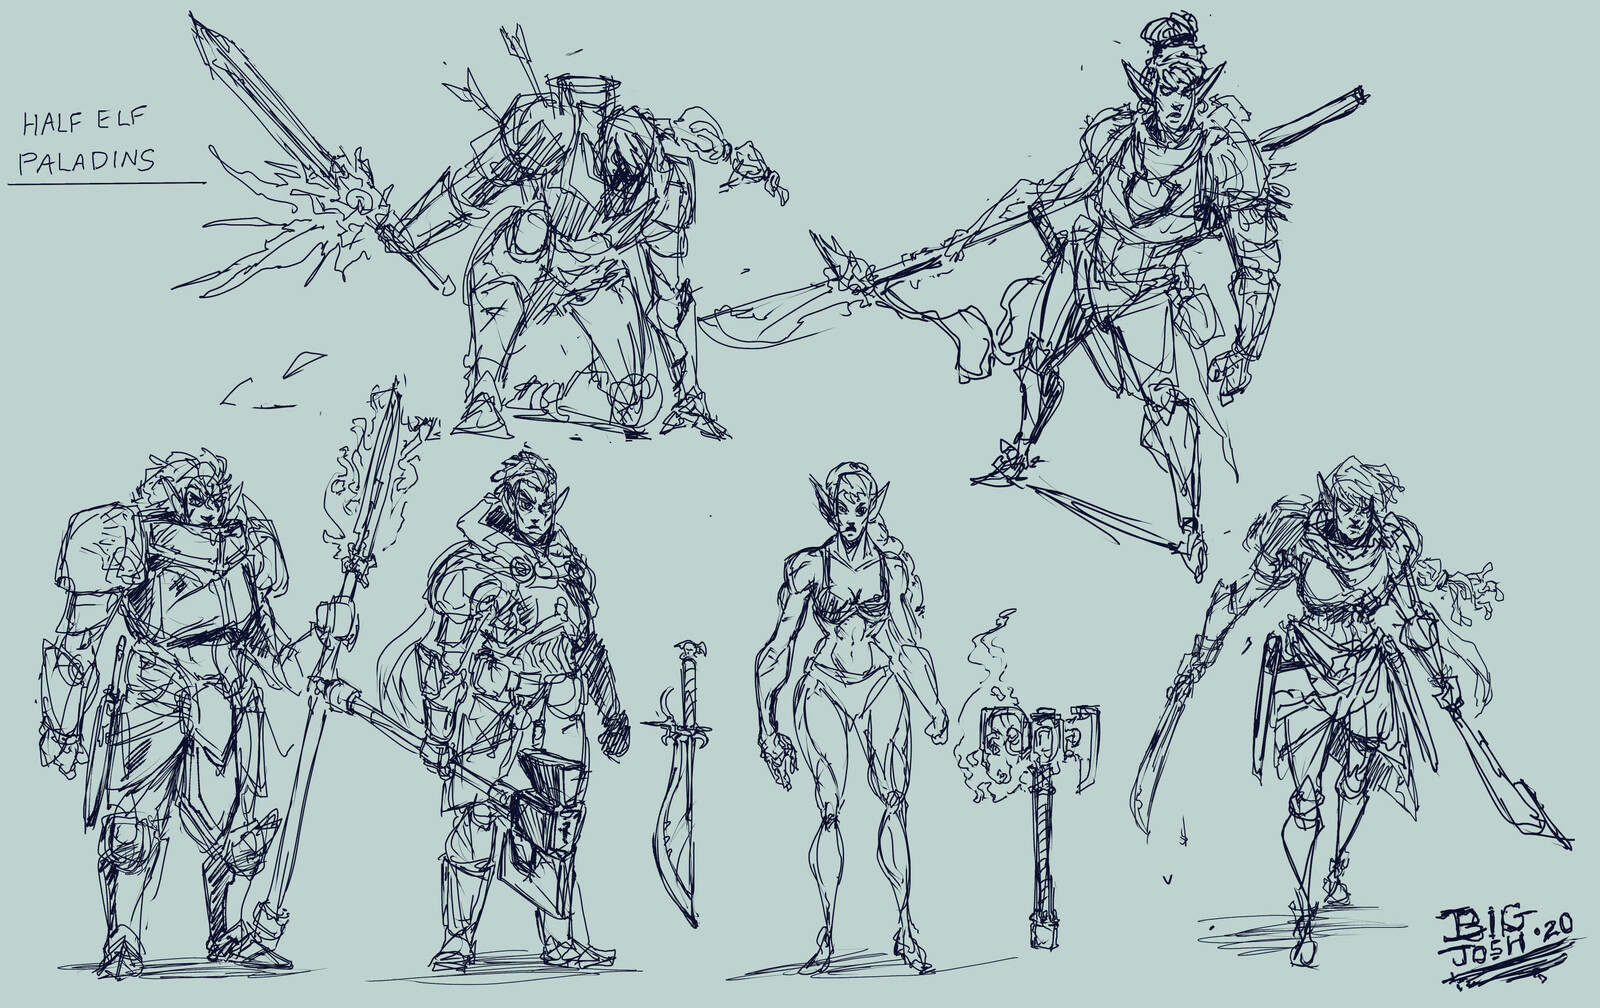 Some outfit explorations for the paladin. I wanted something that was heroic, but a little more weathered and long campaign than a standard fantasy paladin. 